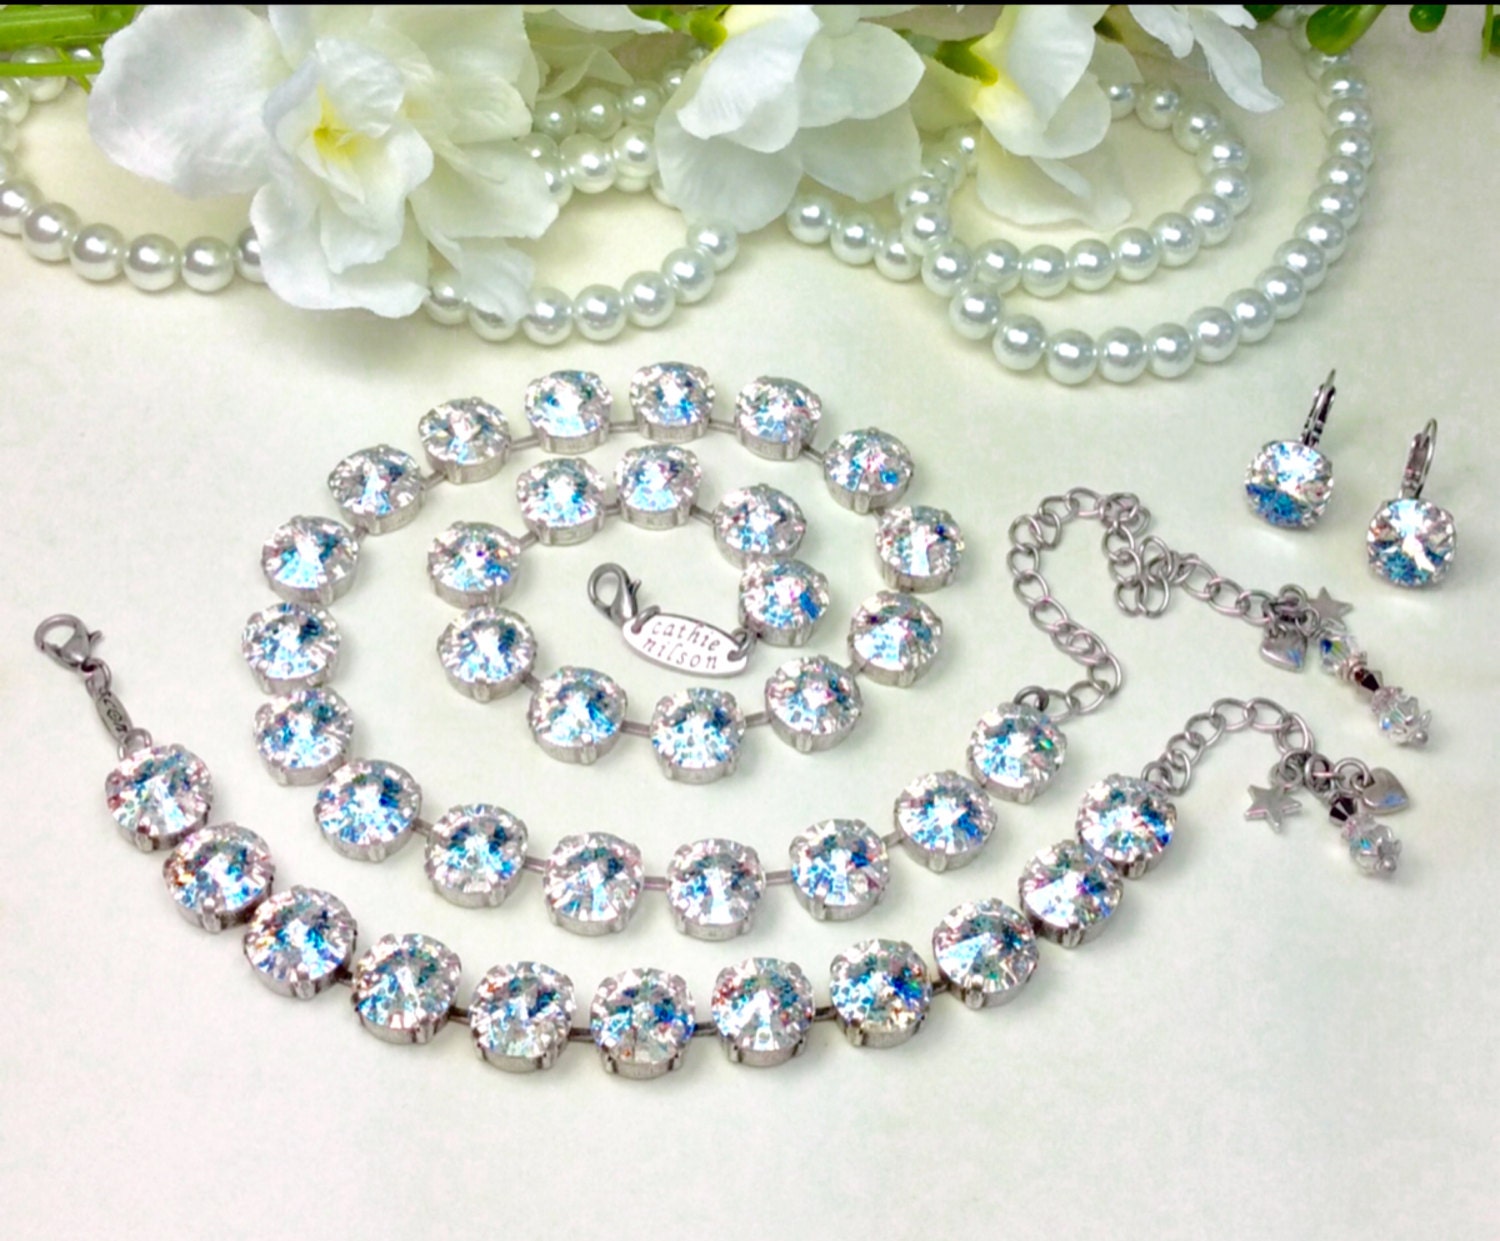 Swarovski Crystal 12MM White Patina Necklace, Bracelet,and Earrings- Designer Inspired - Classy & Beautiful Bridal Necklace! - FREE SHIPPING